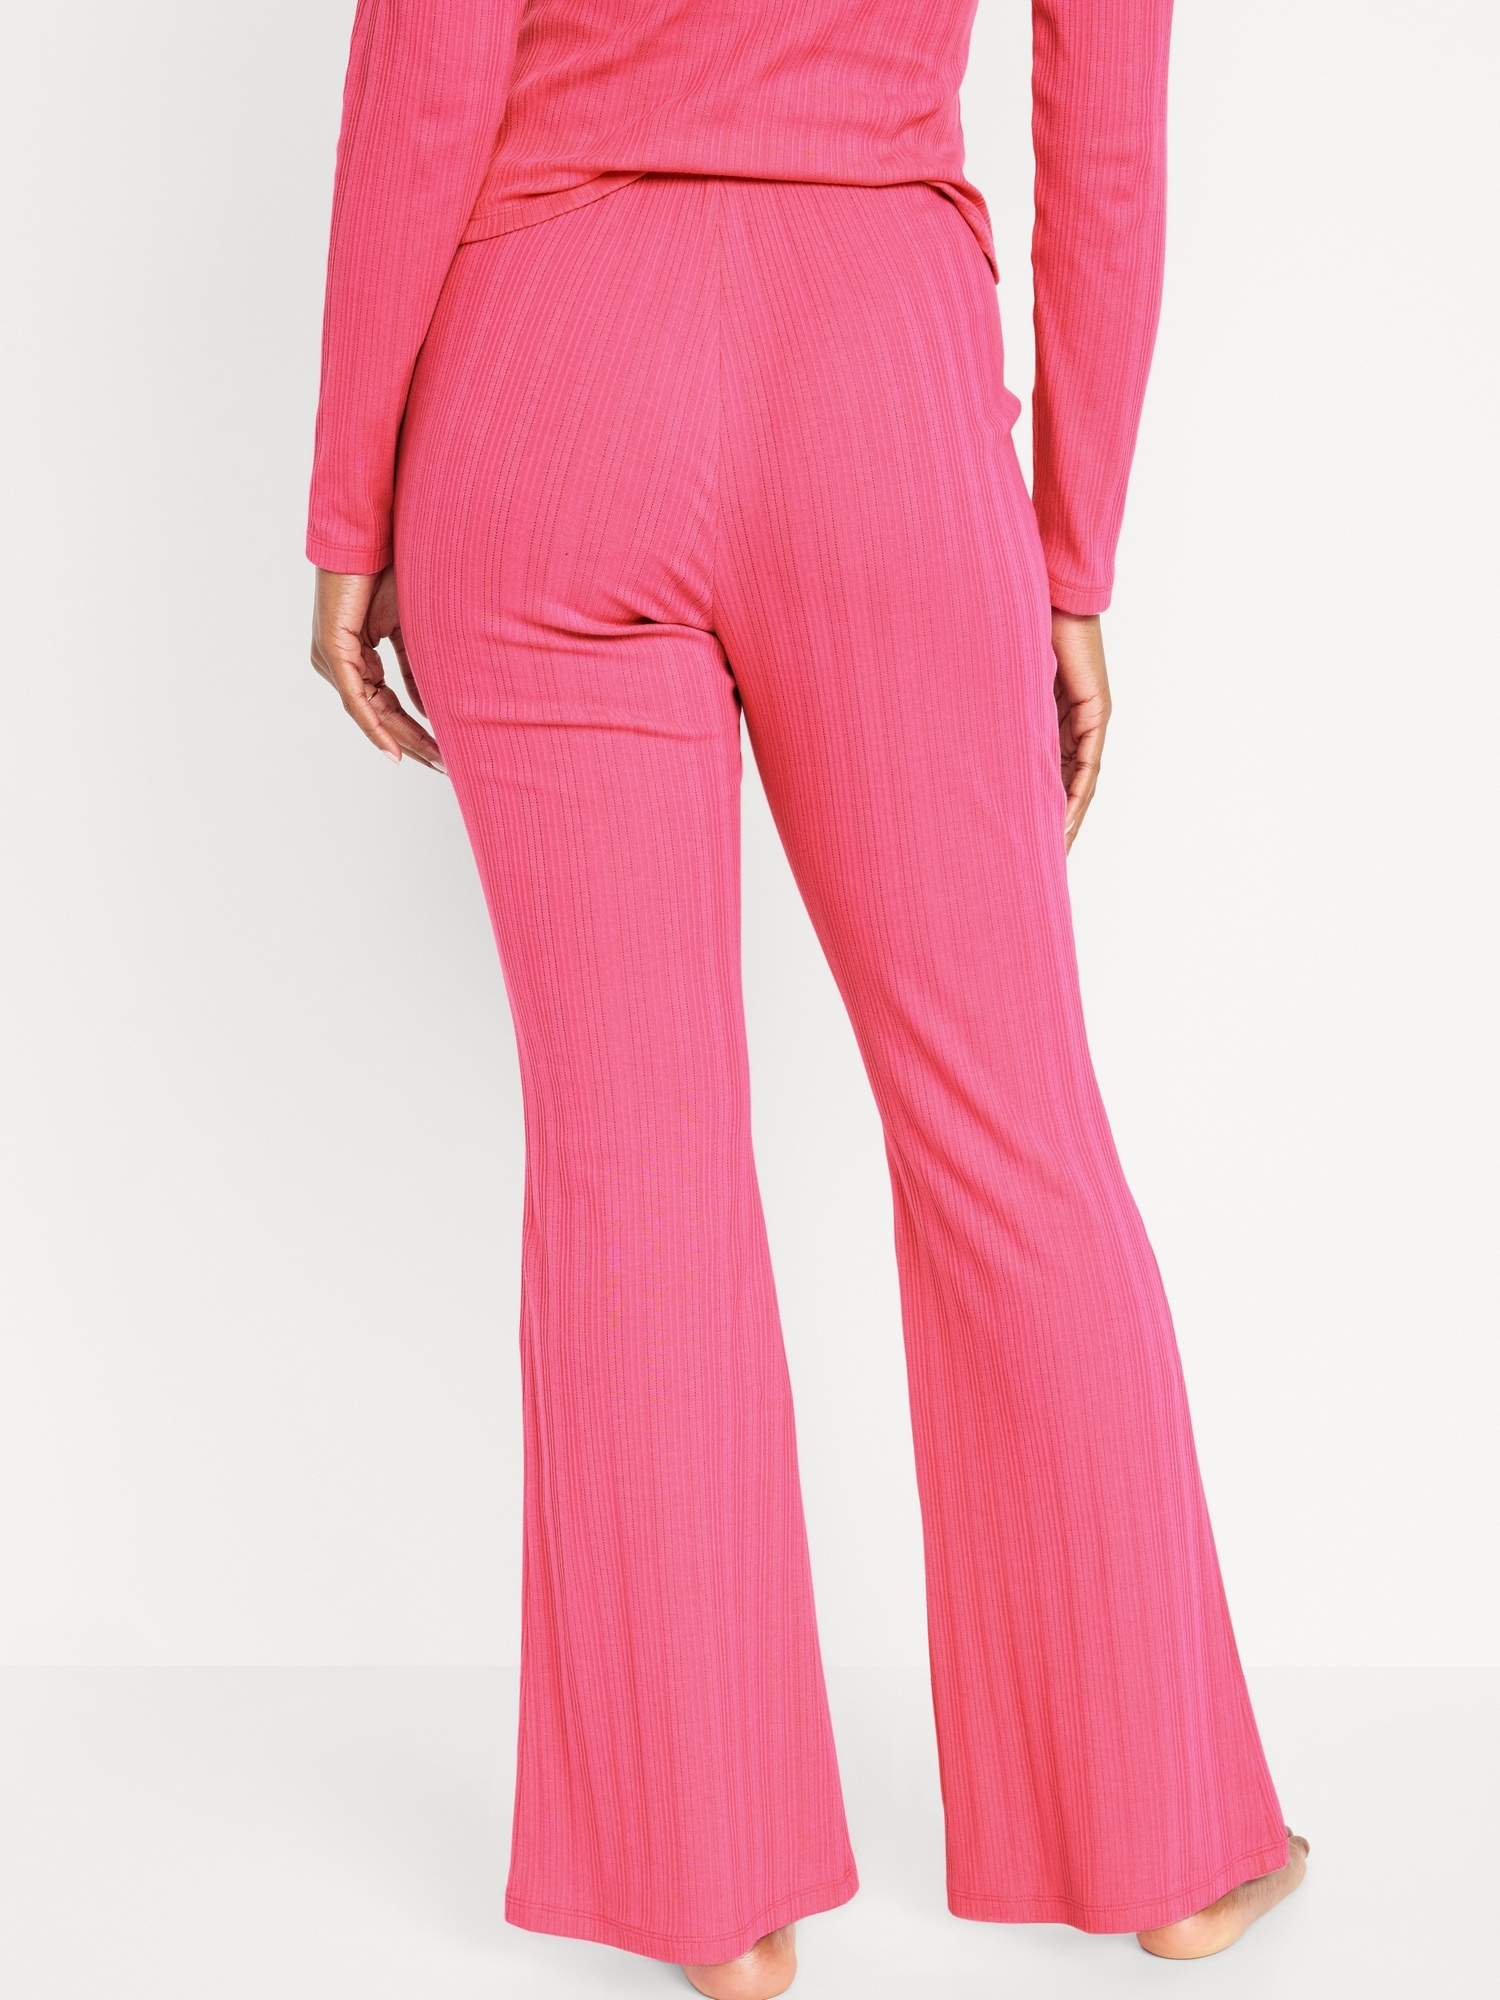 High-Waisted Pointelle-Knit Boot-Cut Pajama Pants